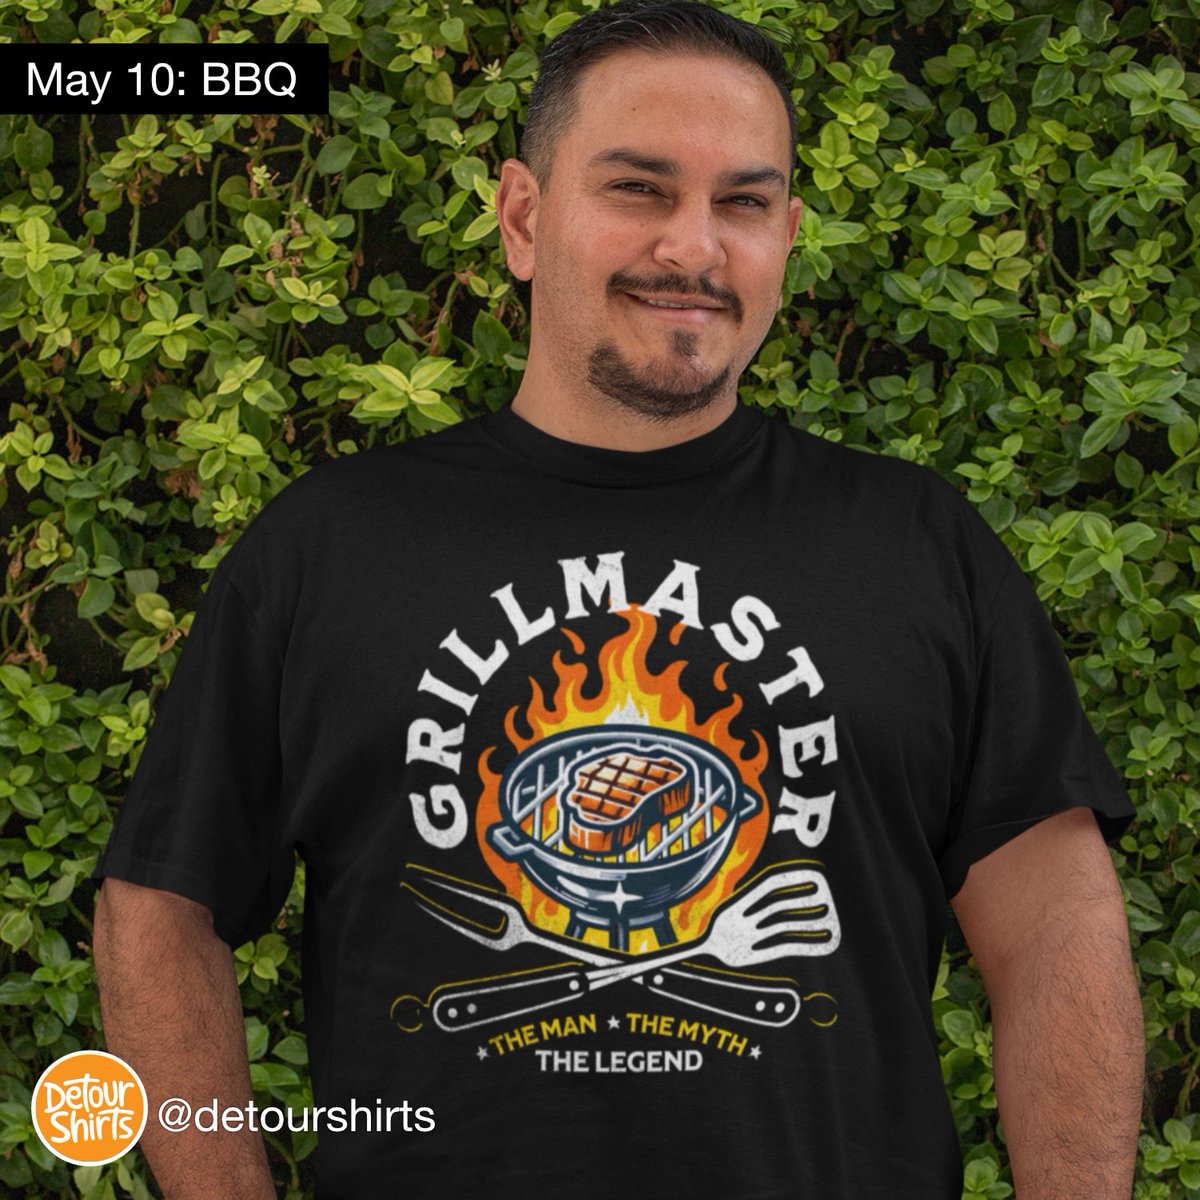 My design for BBQ for Design with Detour.

Grillmaster, the man, the myth, the legend.
What do you think?